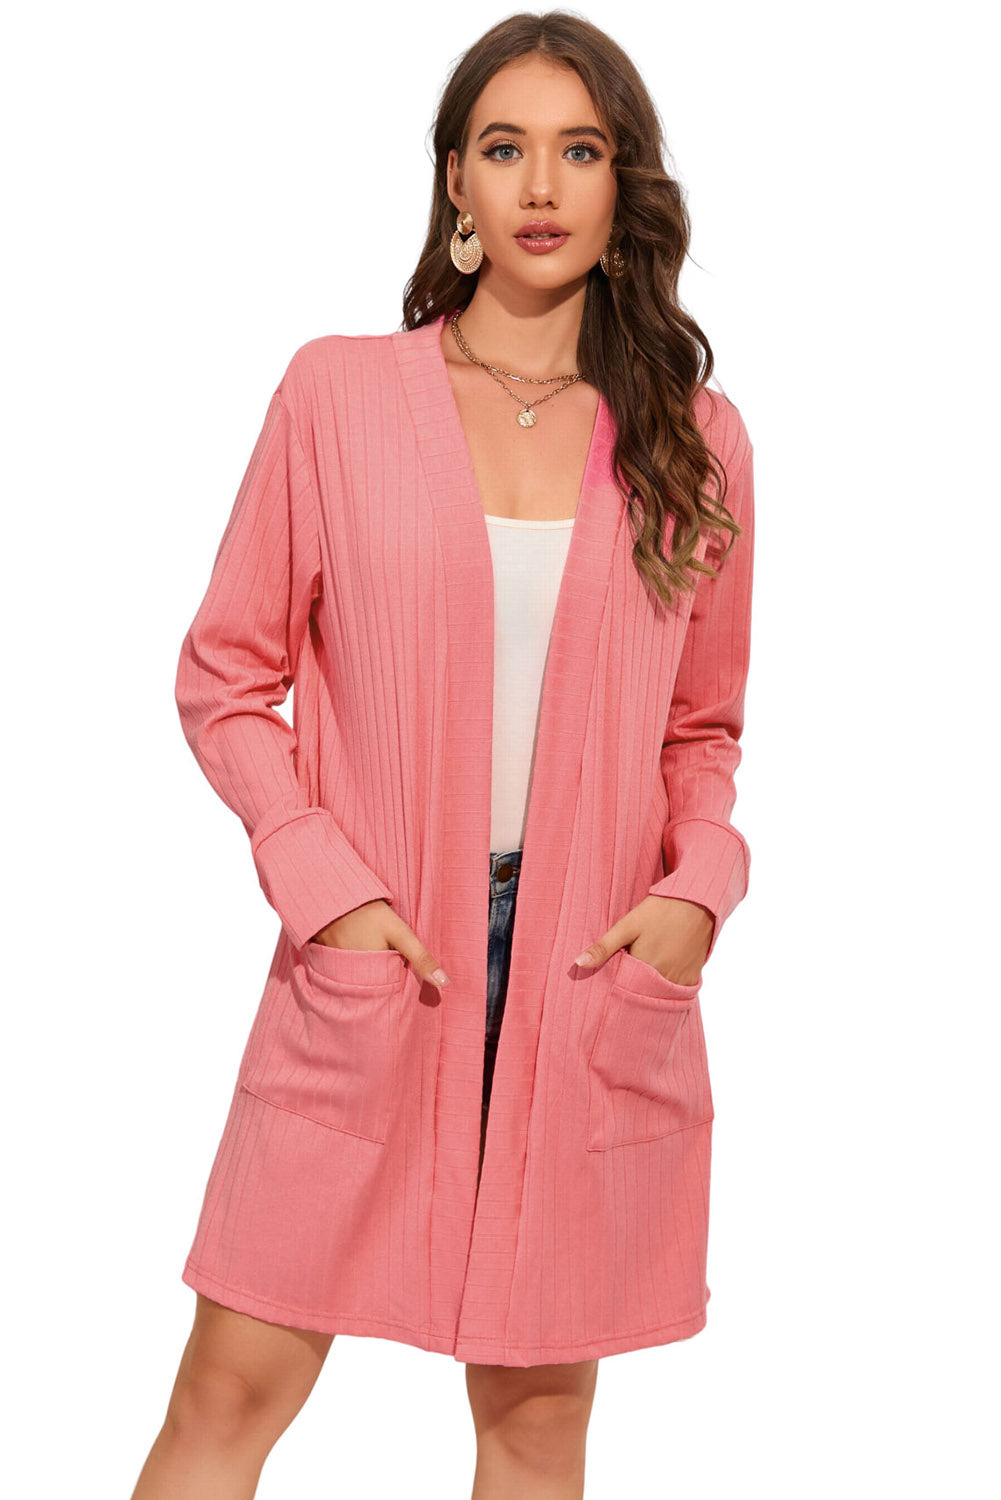 Open Front Long Sleeve Longline Cardigan with Pockets - Women’s Clothing & Accessories - Shirts & Tops - 4 - 2024